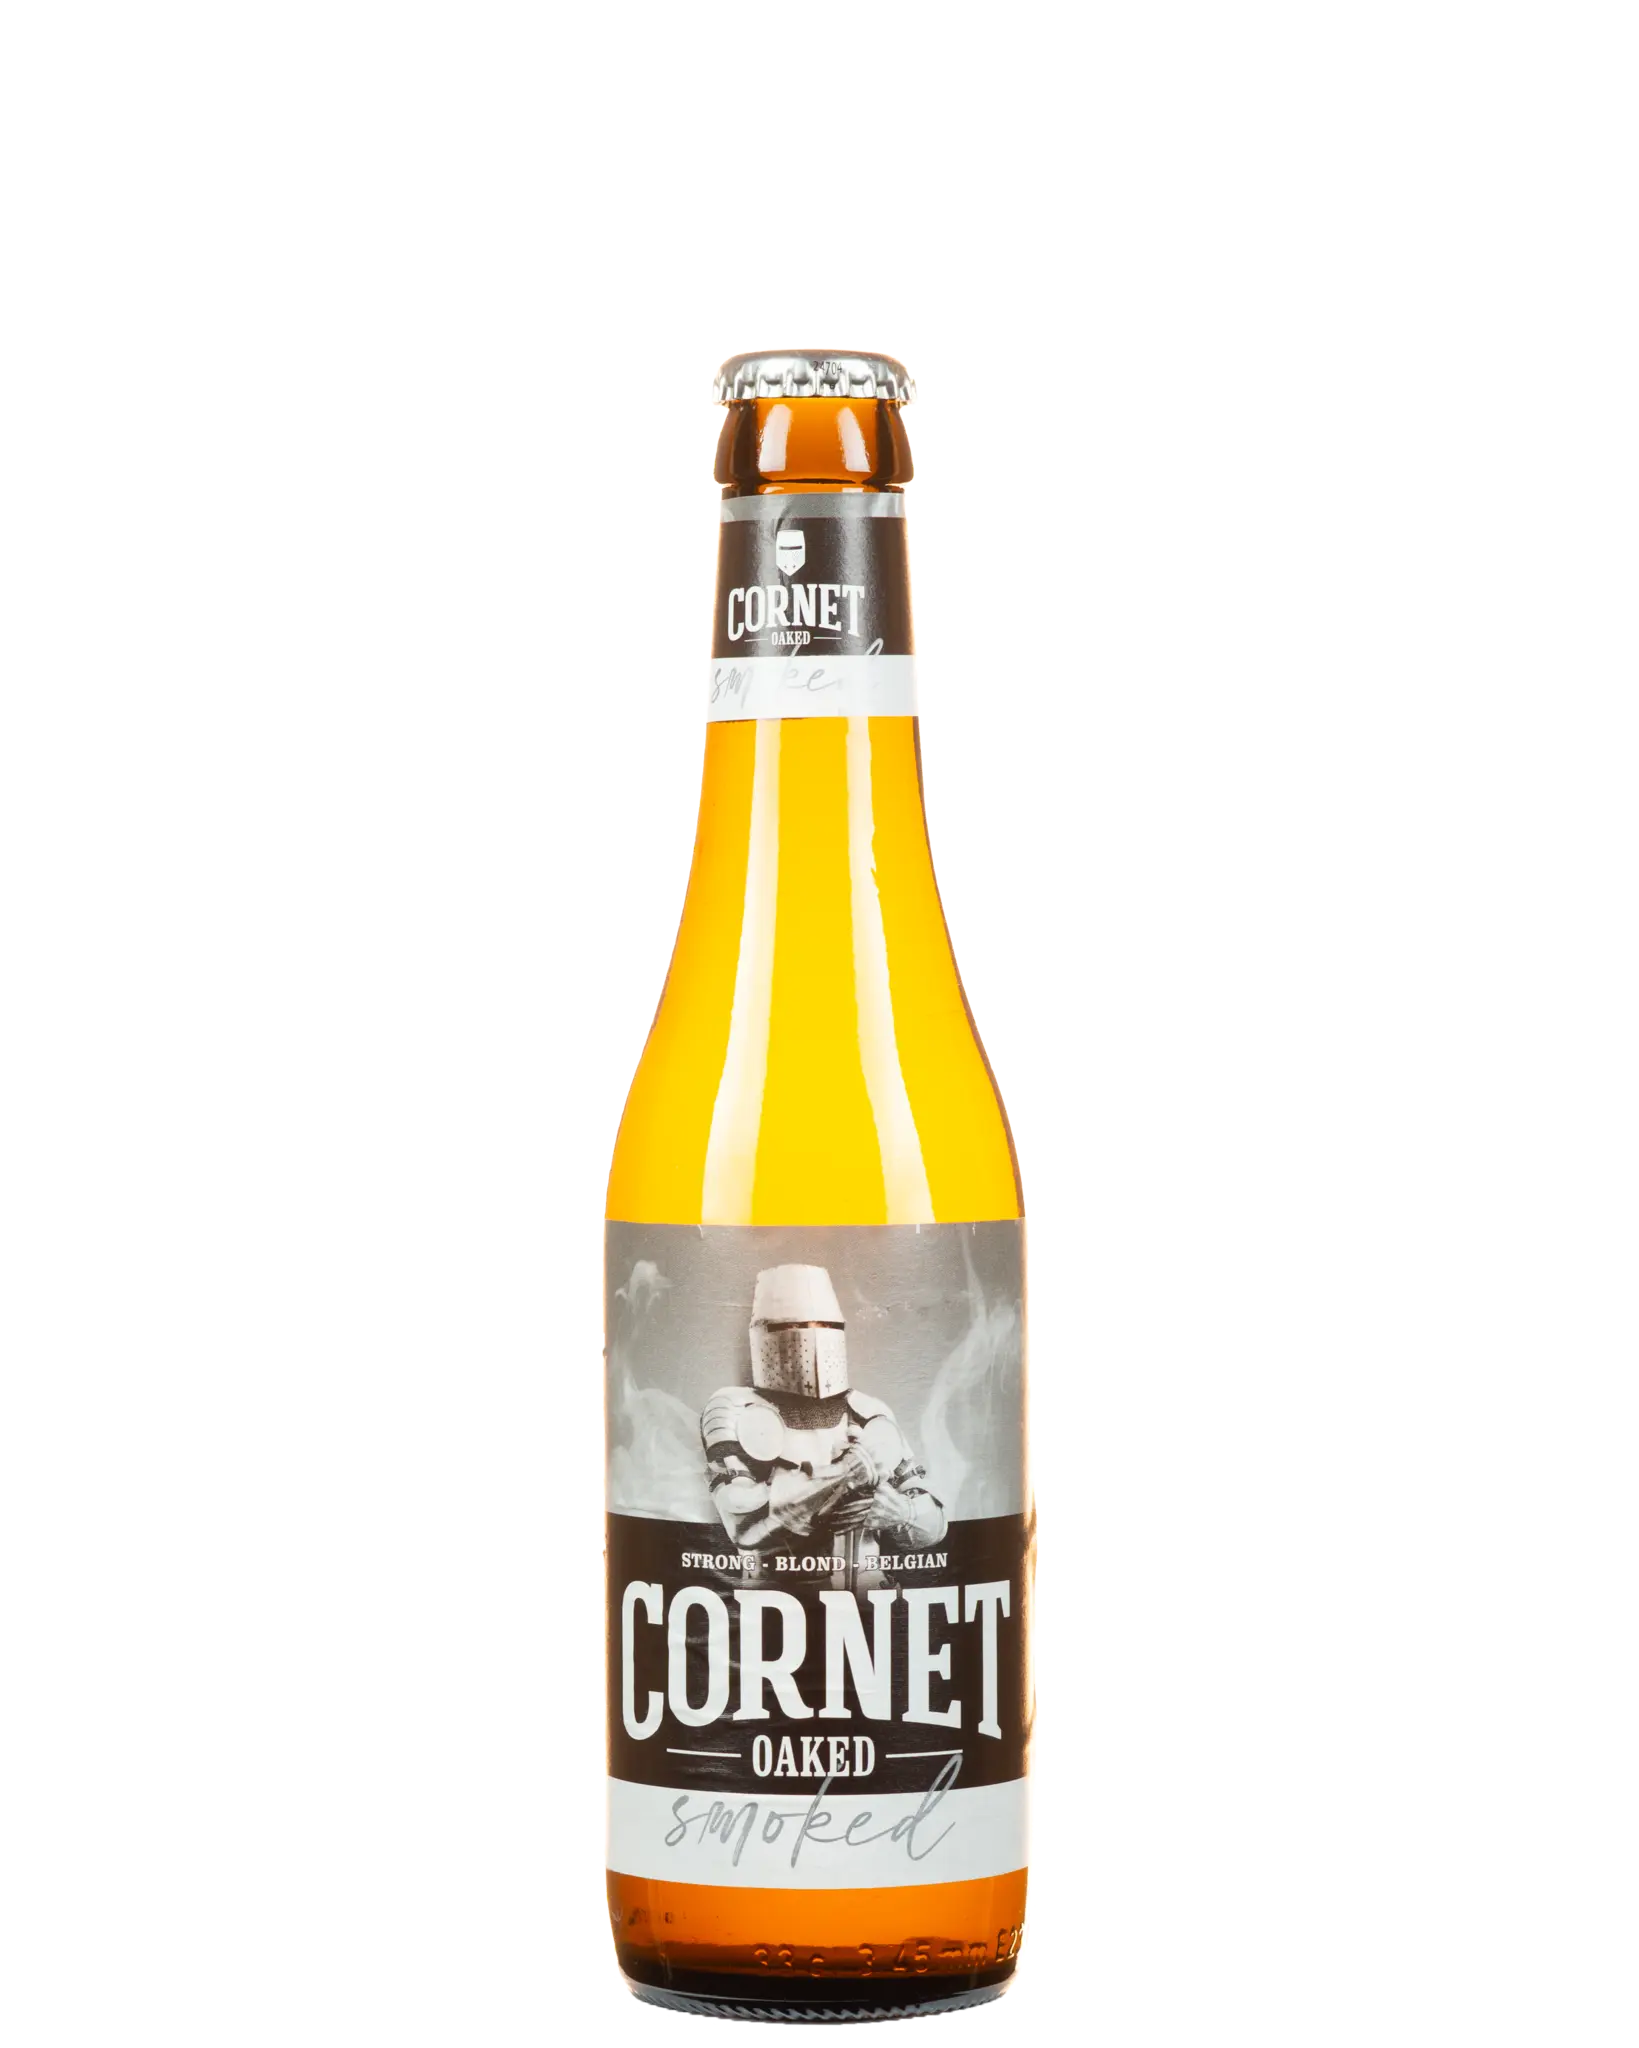 cornet smoked - What is a cornet beer in English